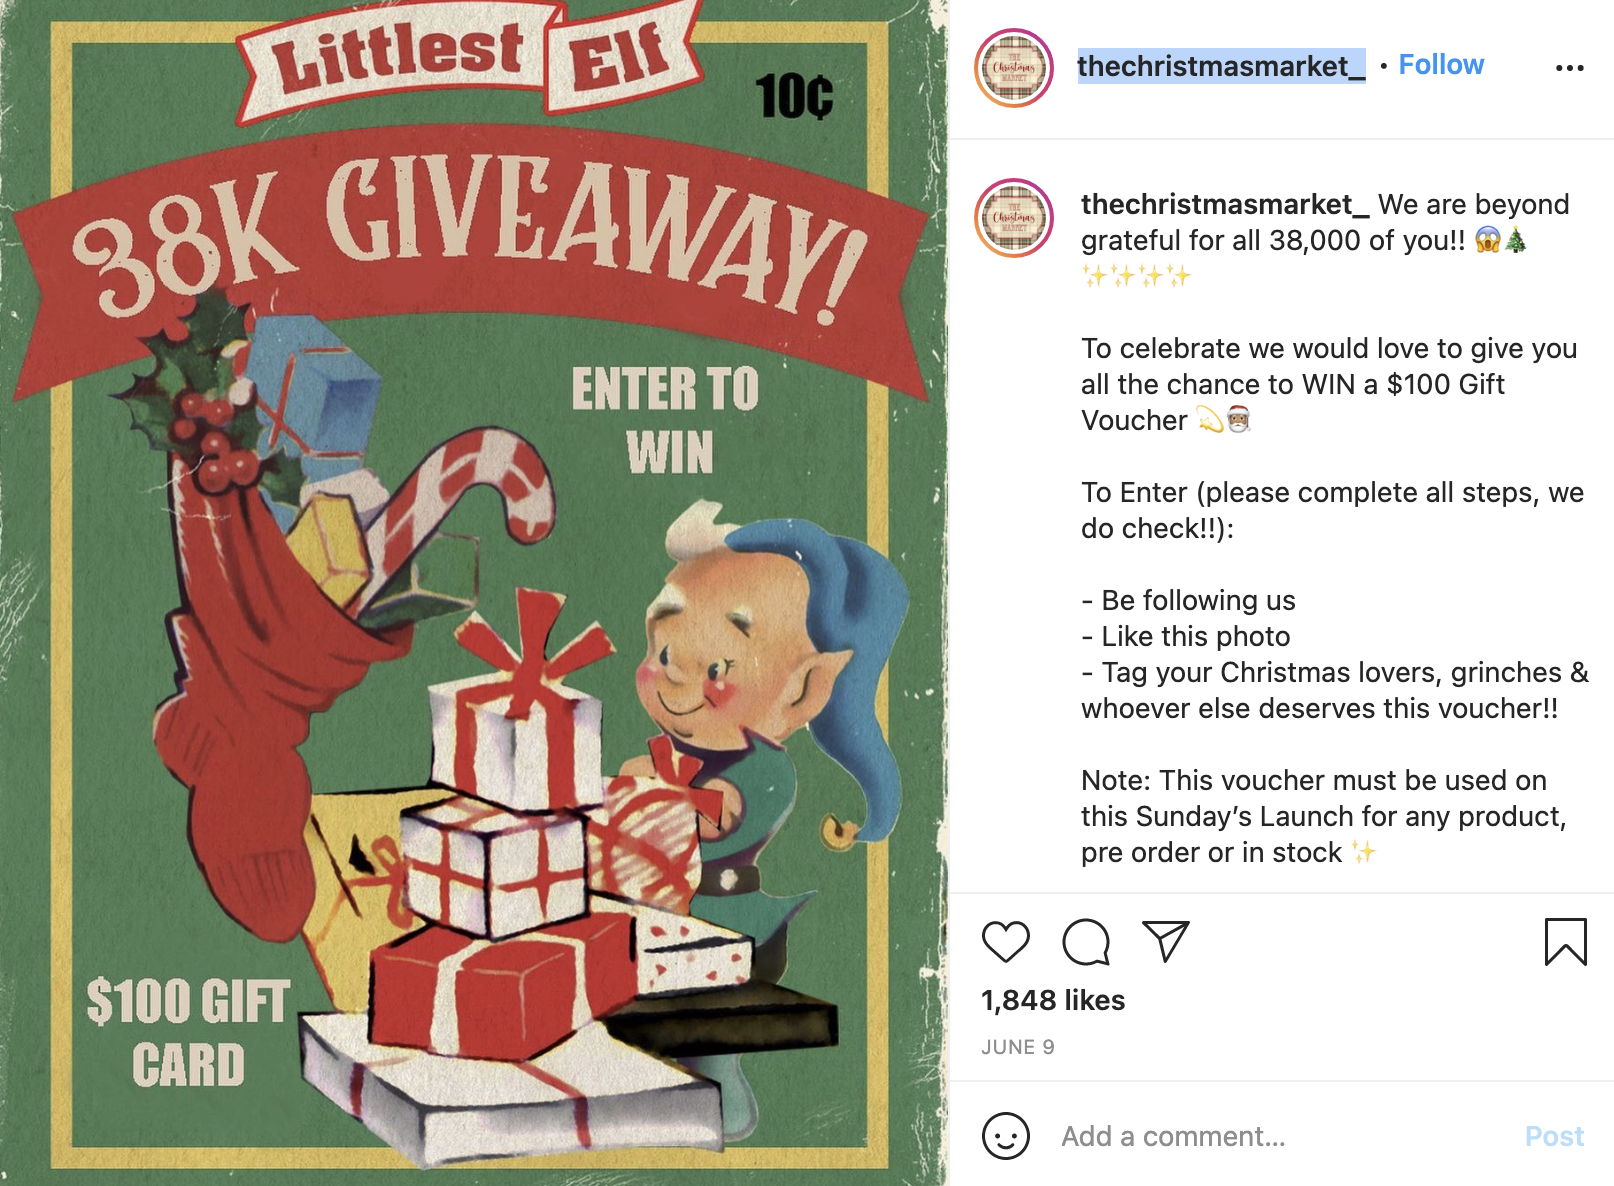 The Christmas Market Instagram Giveaway